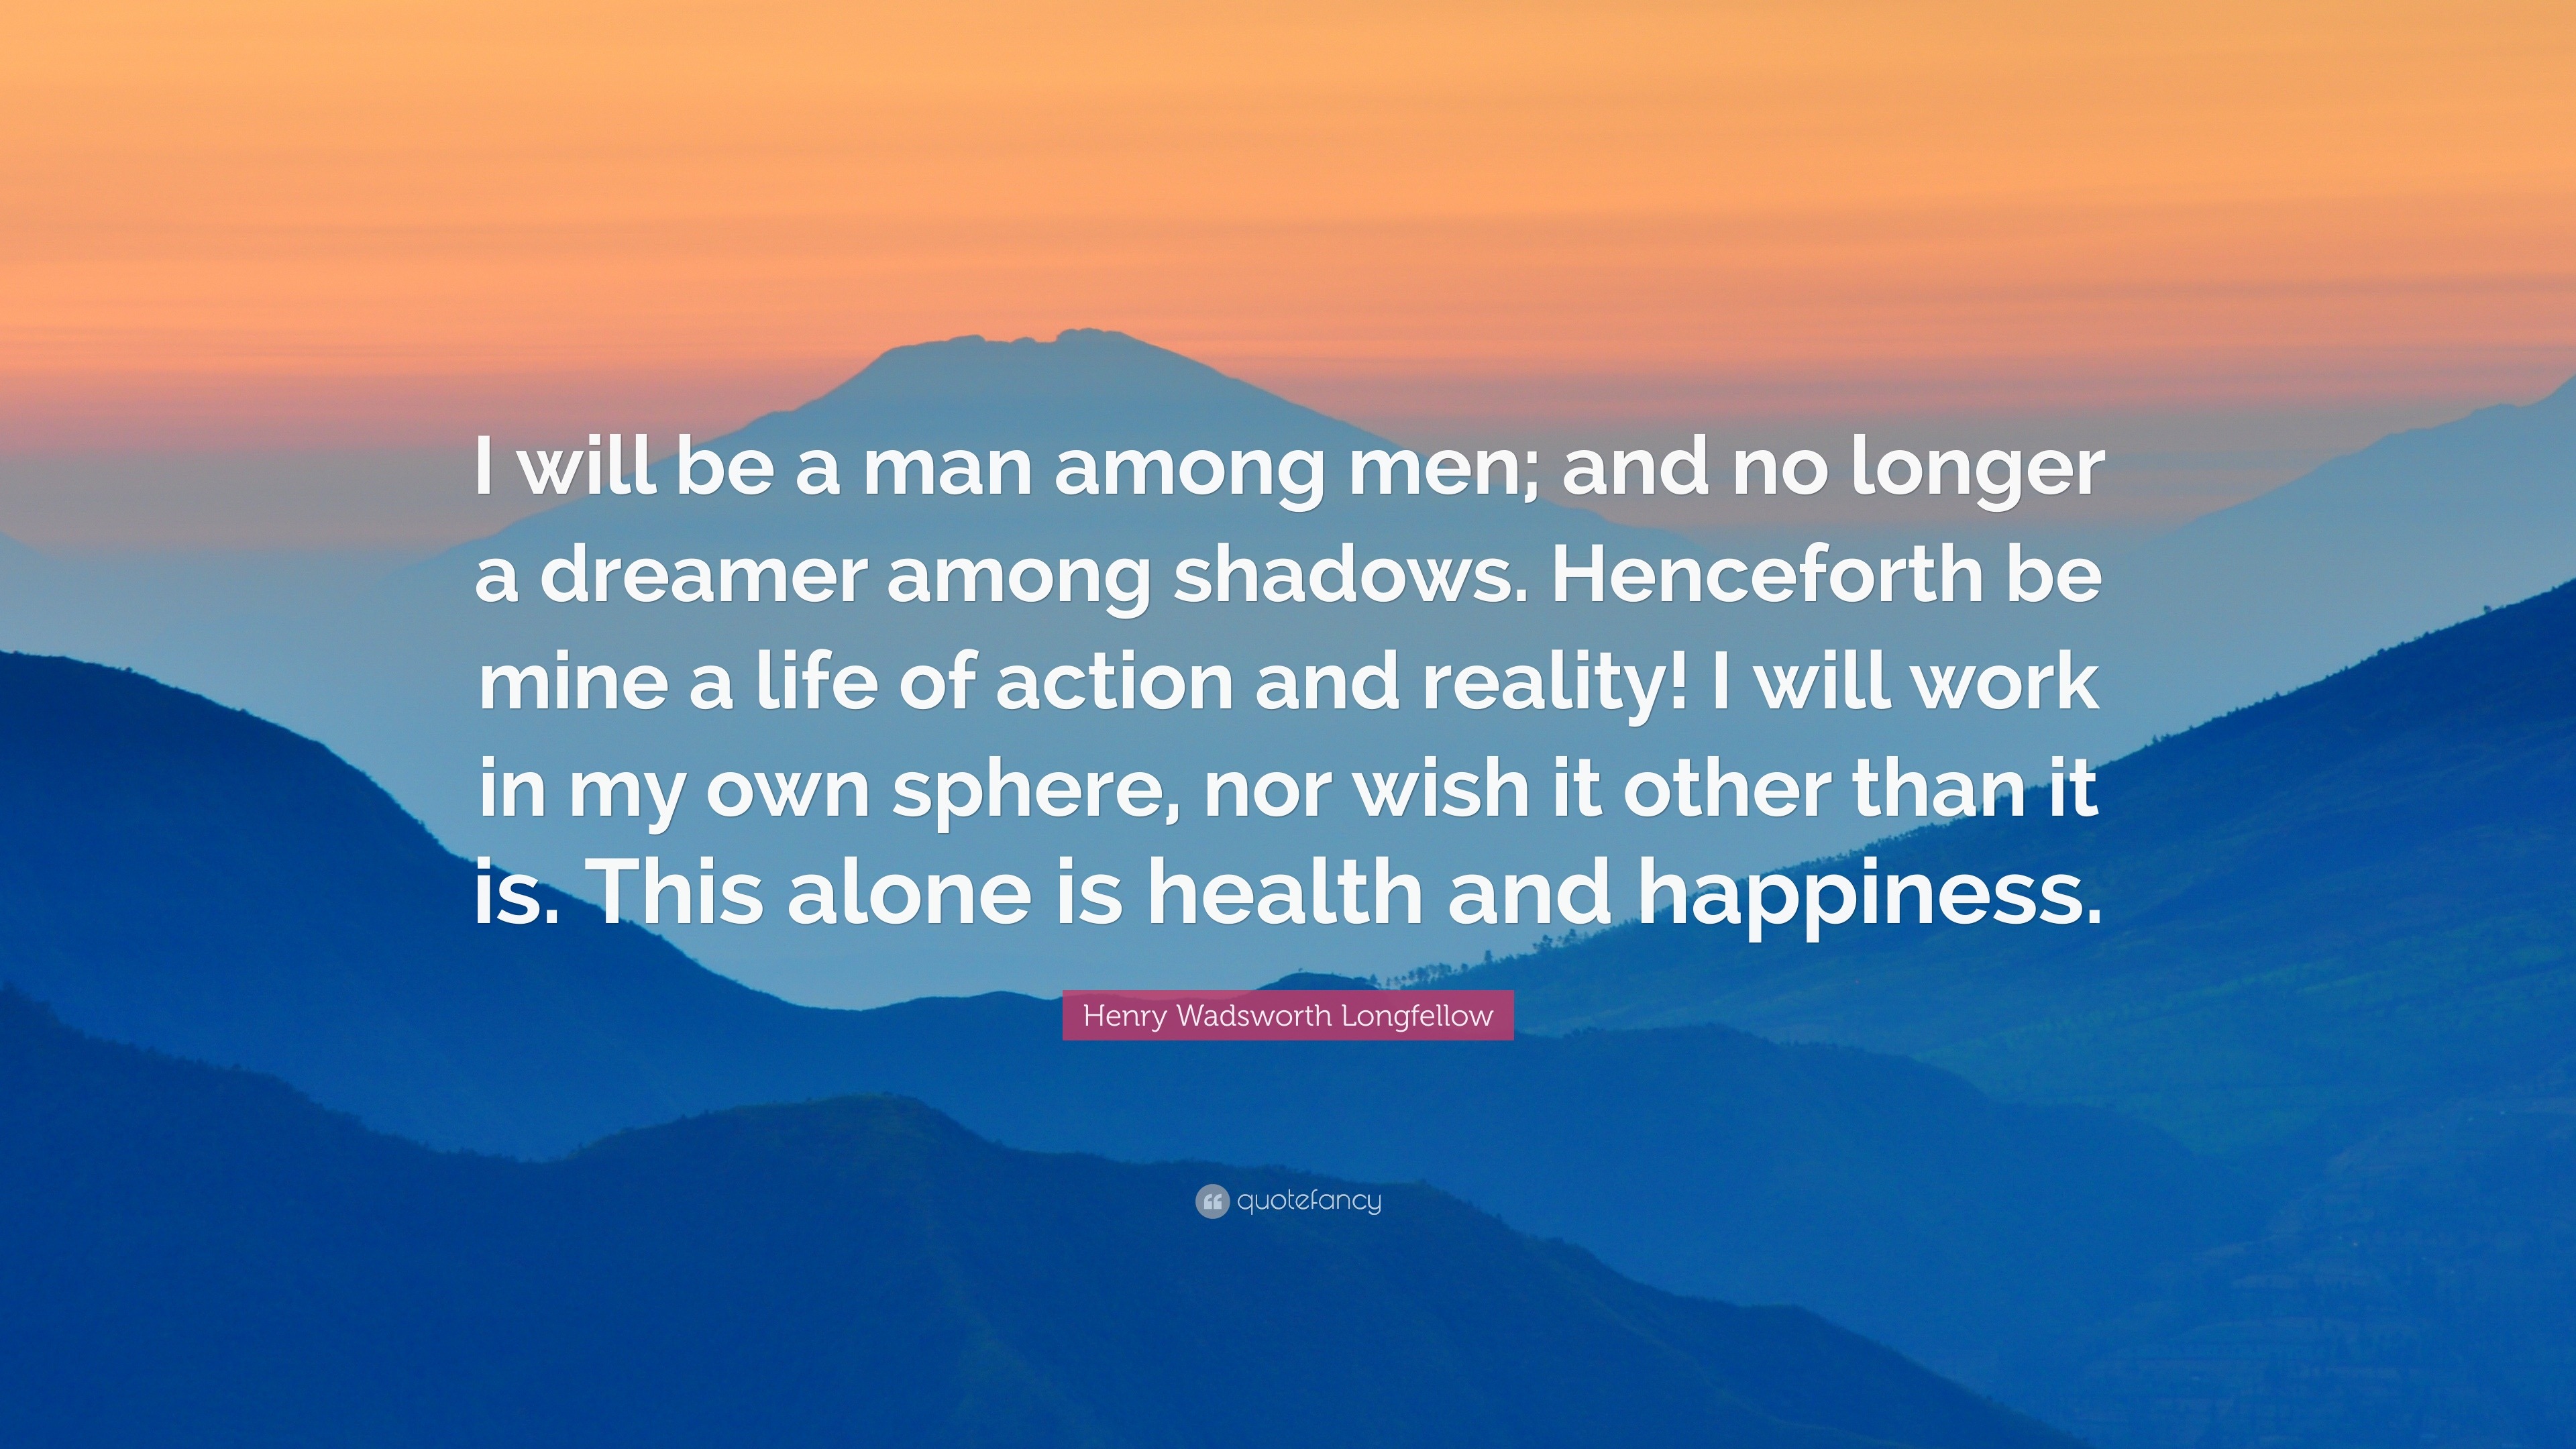 Henry Wadsworth Longfellow Quote: “I will be a man among men; and no ...